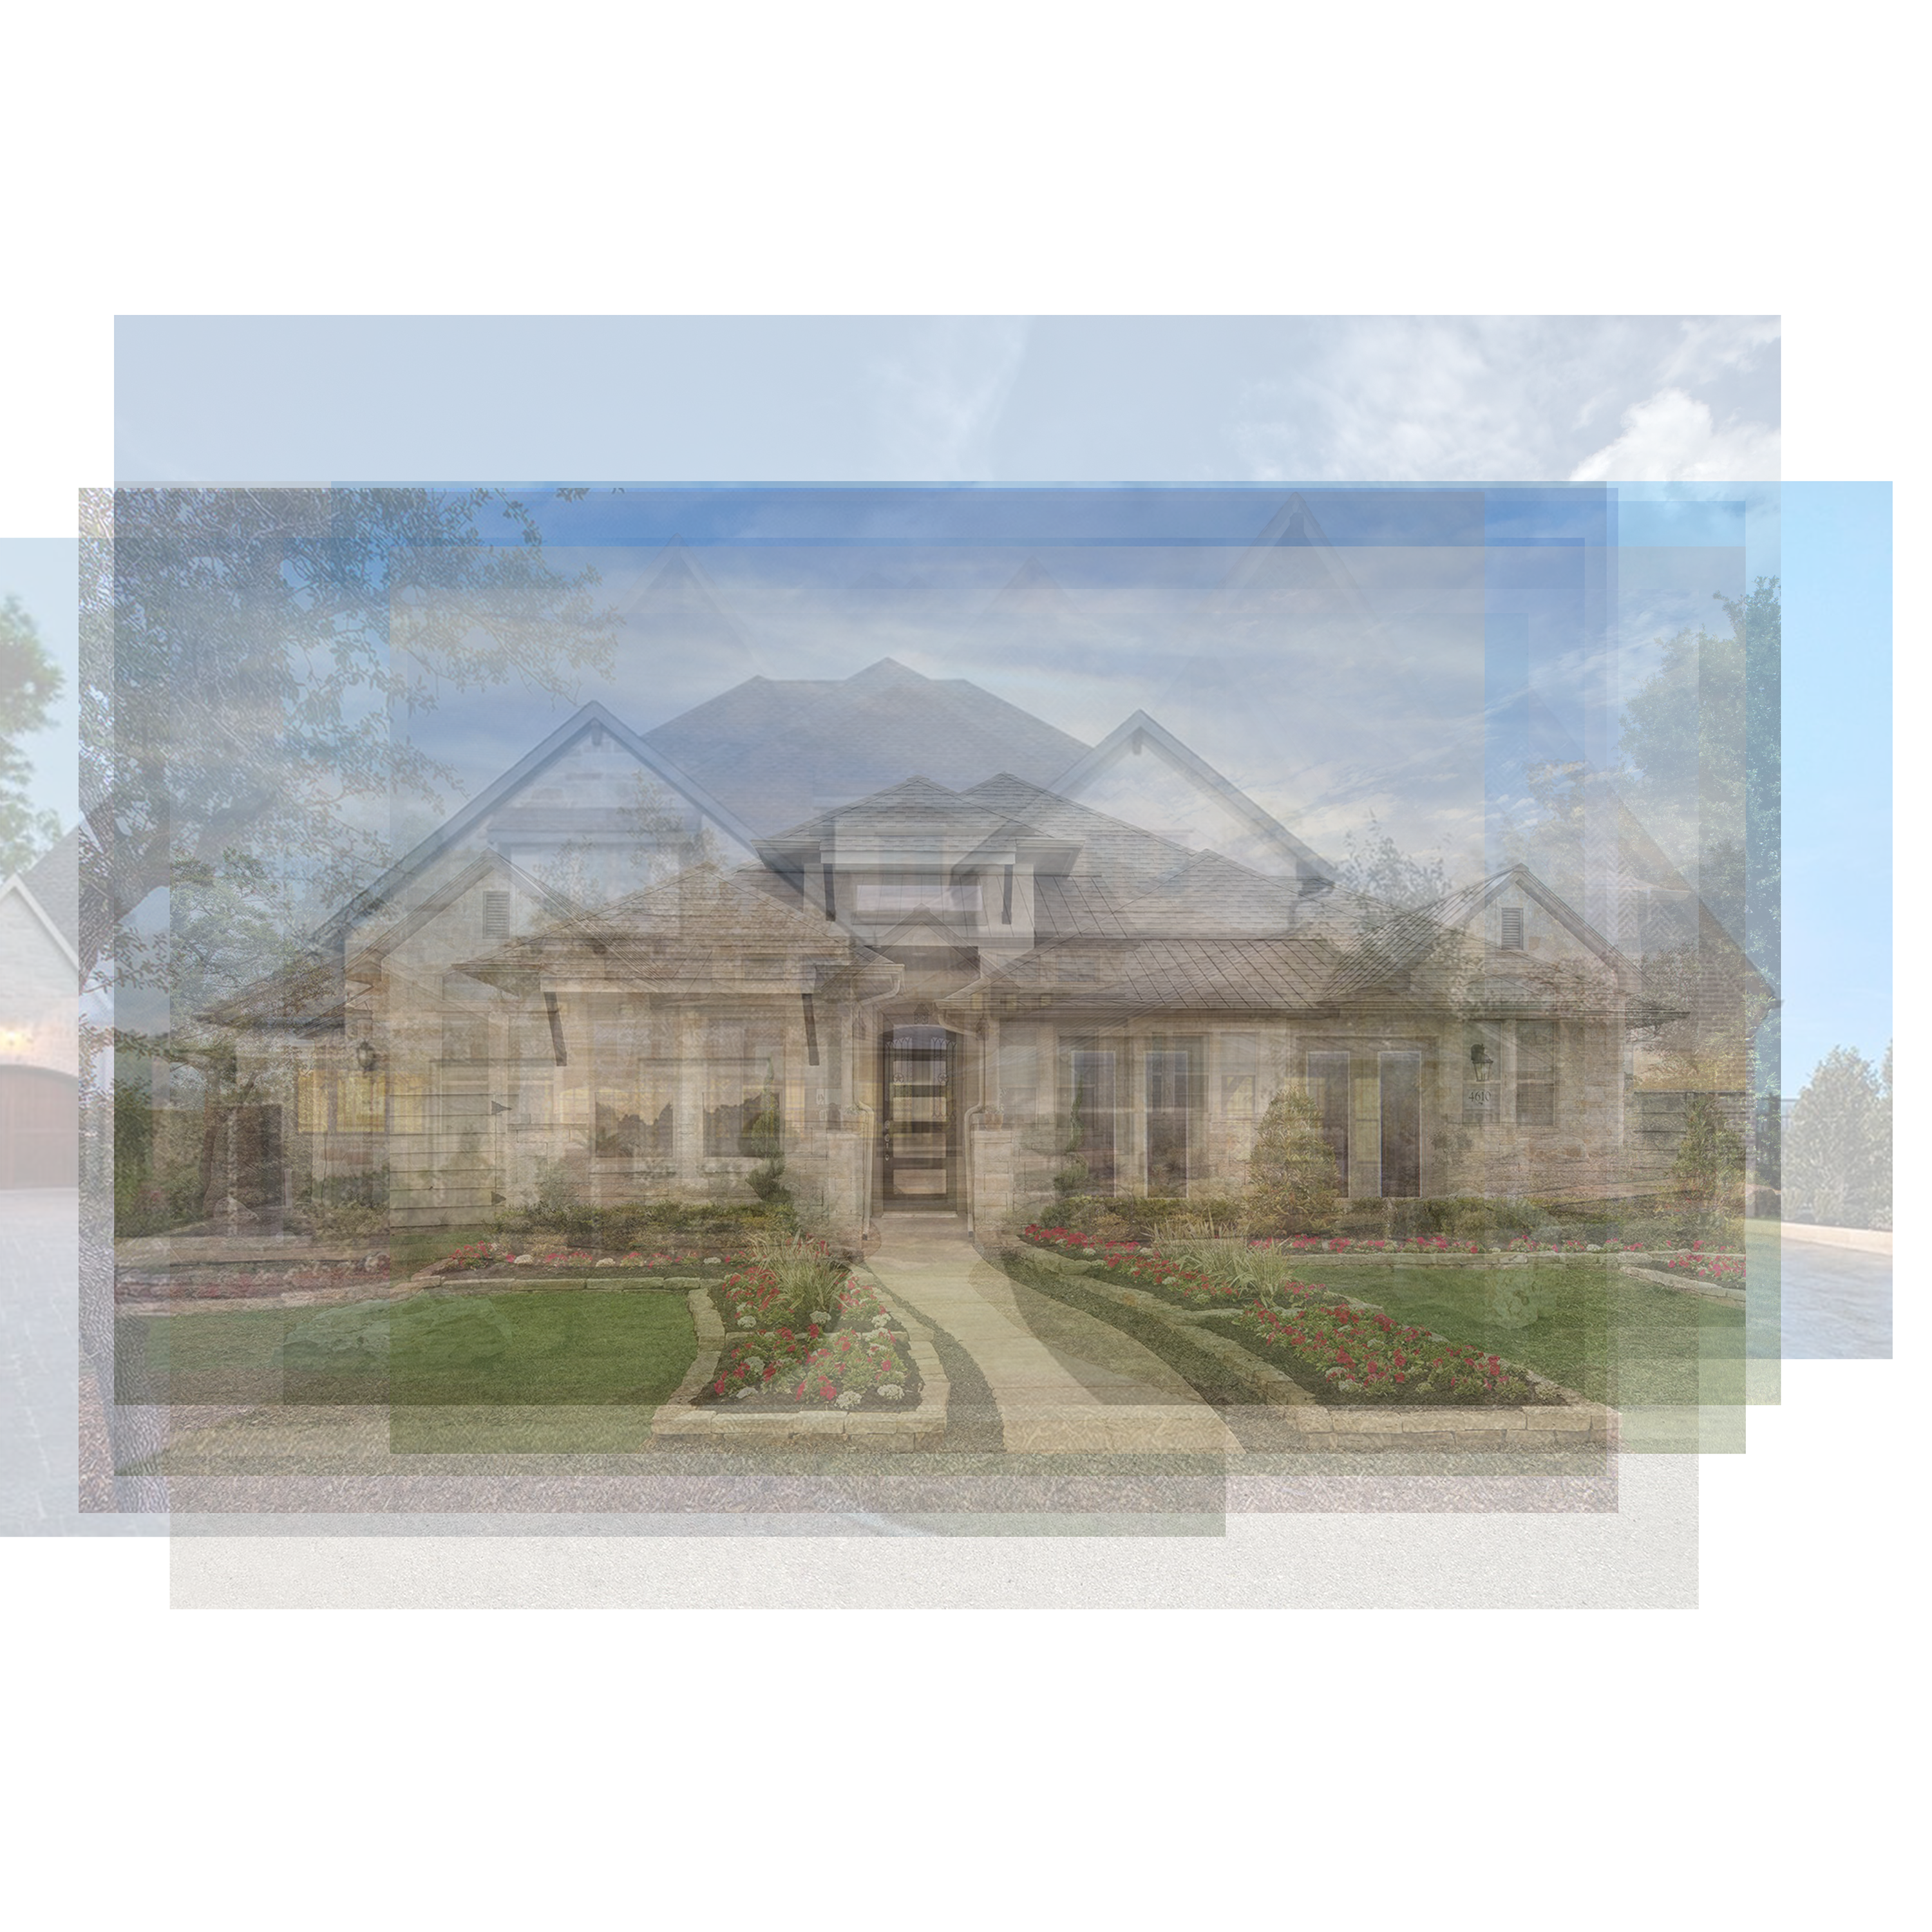 /Collaged%20images%20of%20suburban%20homes%20overlaid%20to%20show%20the%20texture%20and%20current%20priorities%20of%20a%20neighborhood